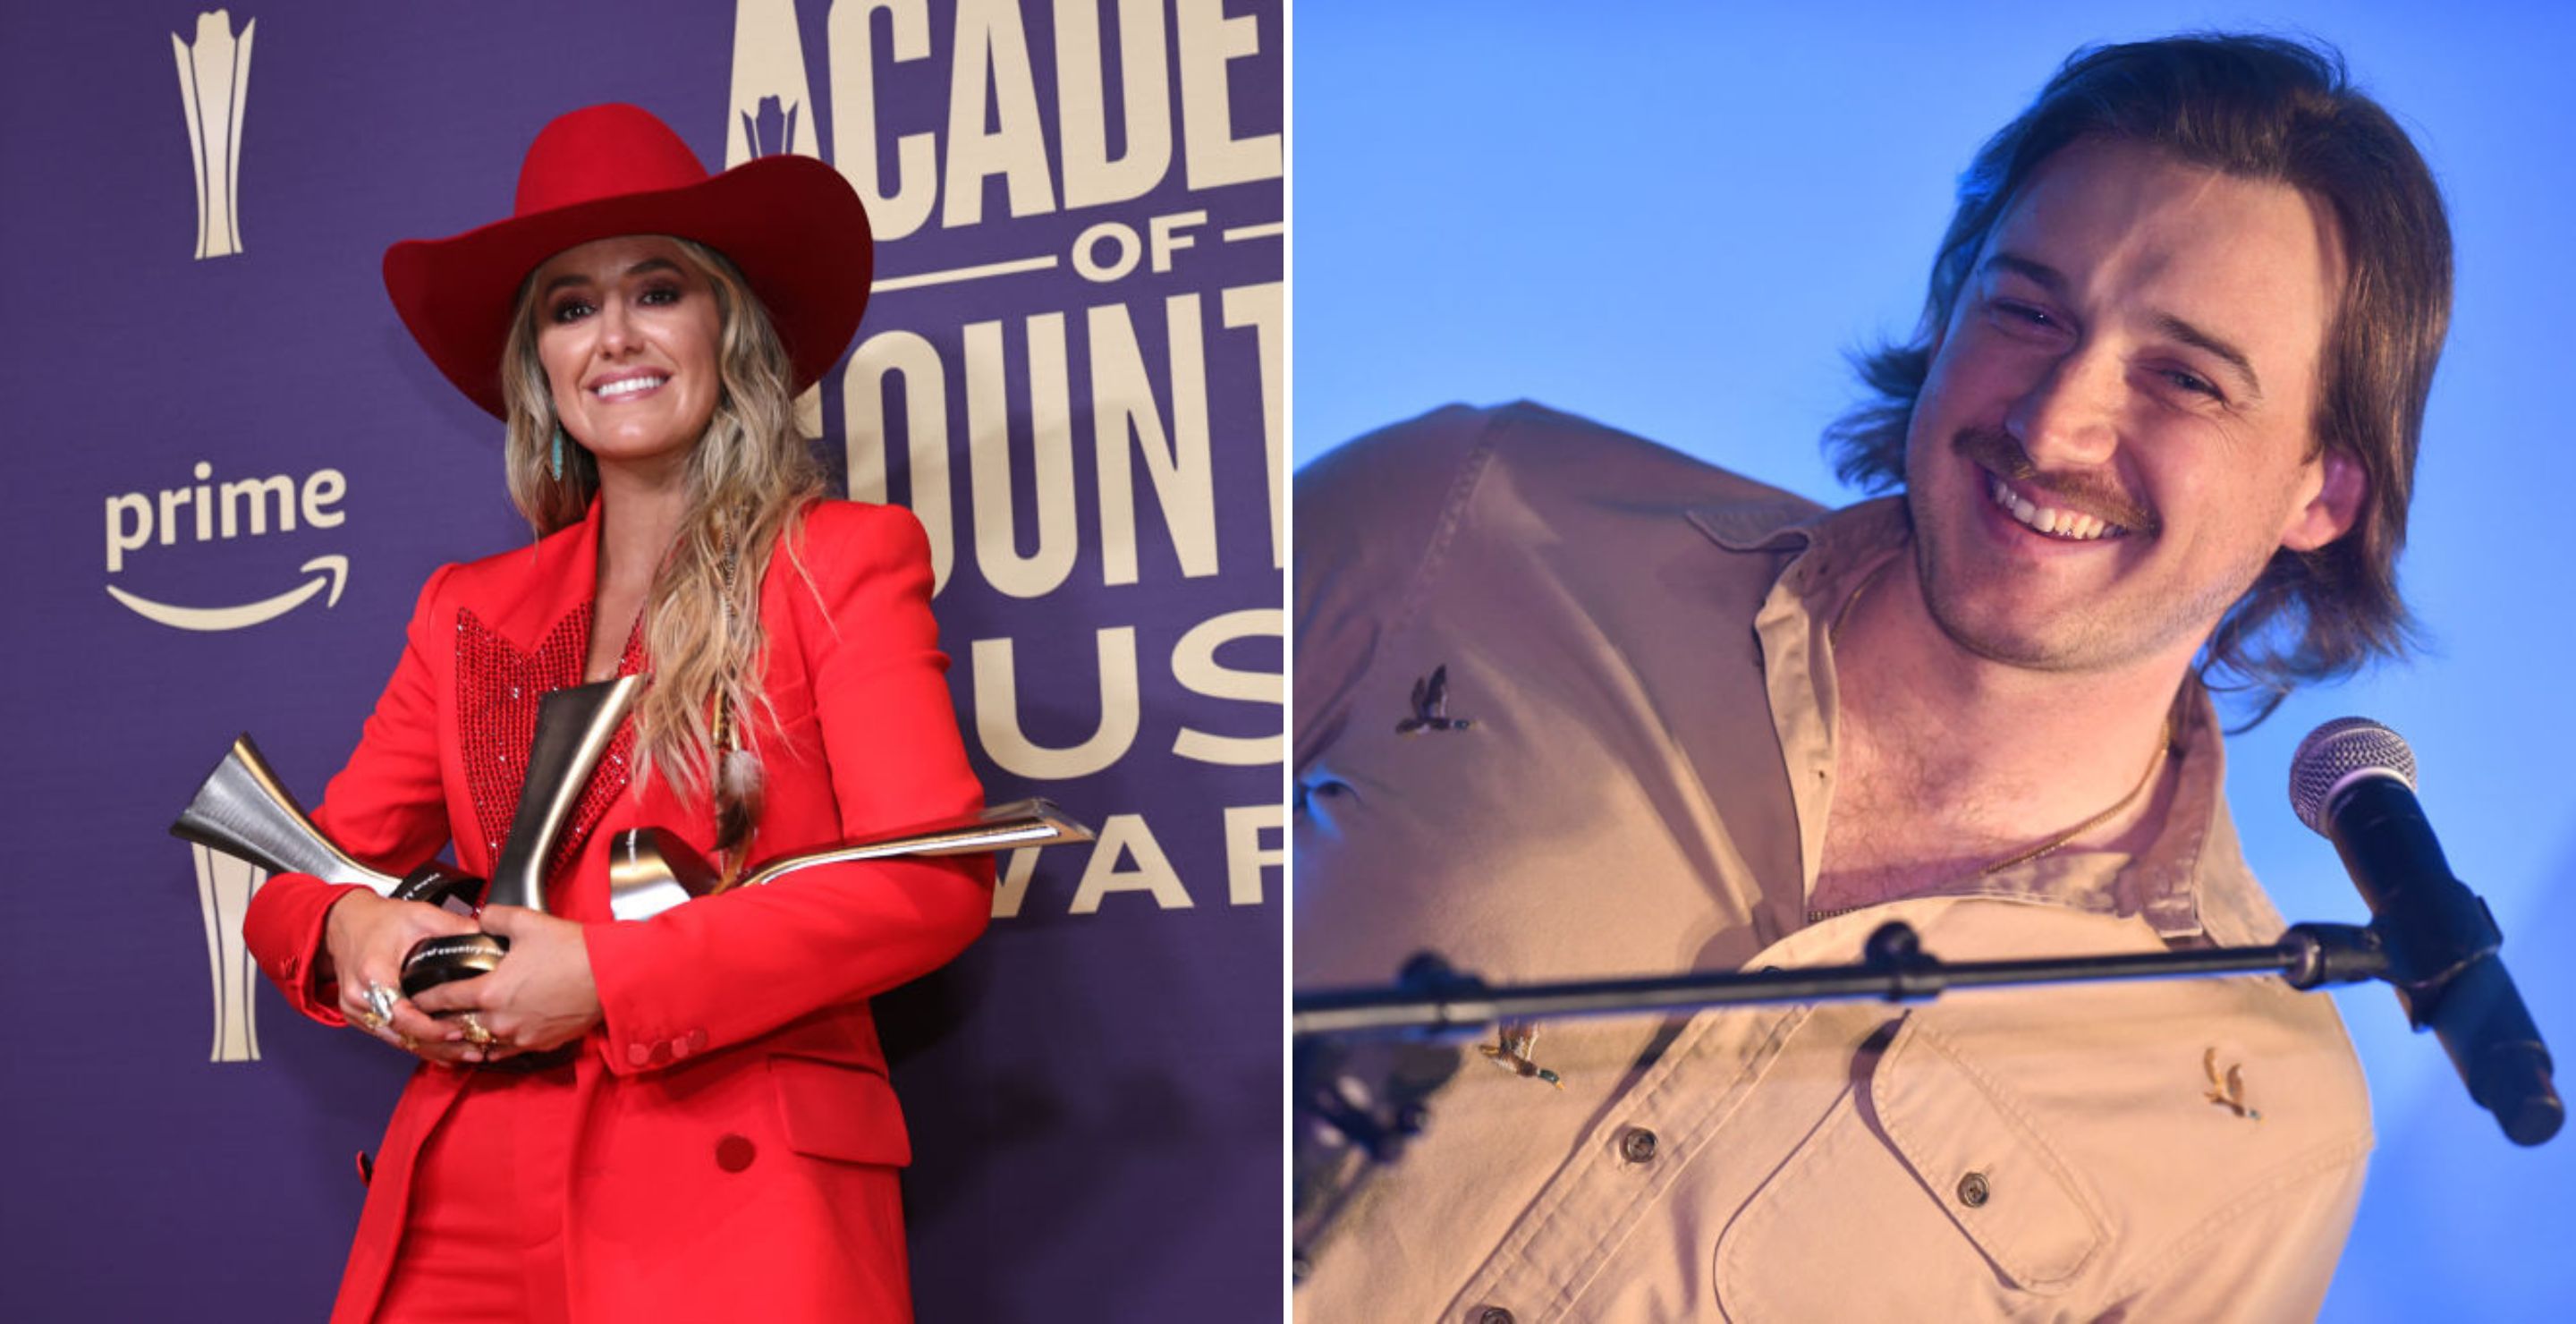 Jaded Morgan Wallen Fans Call Lainey Wilson An 'Industry Plant' After She Wins ACM Entertainer Of The Year